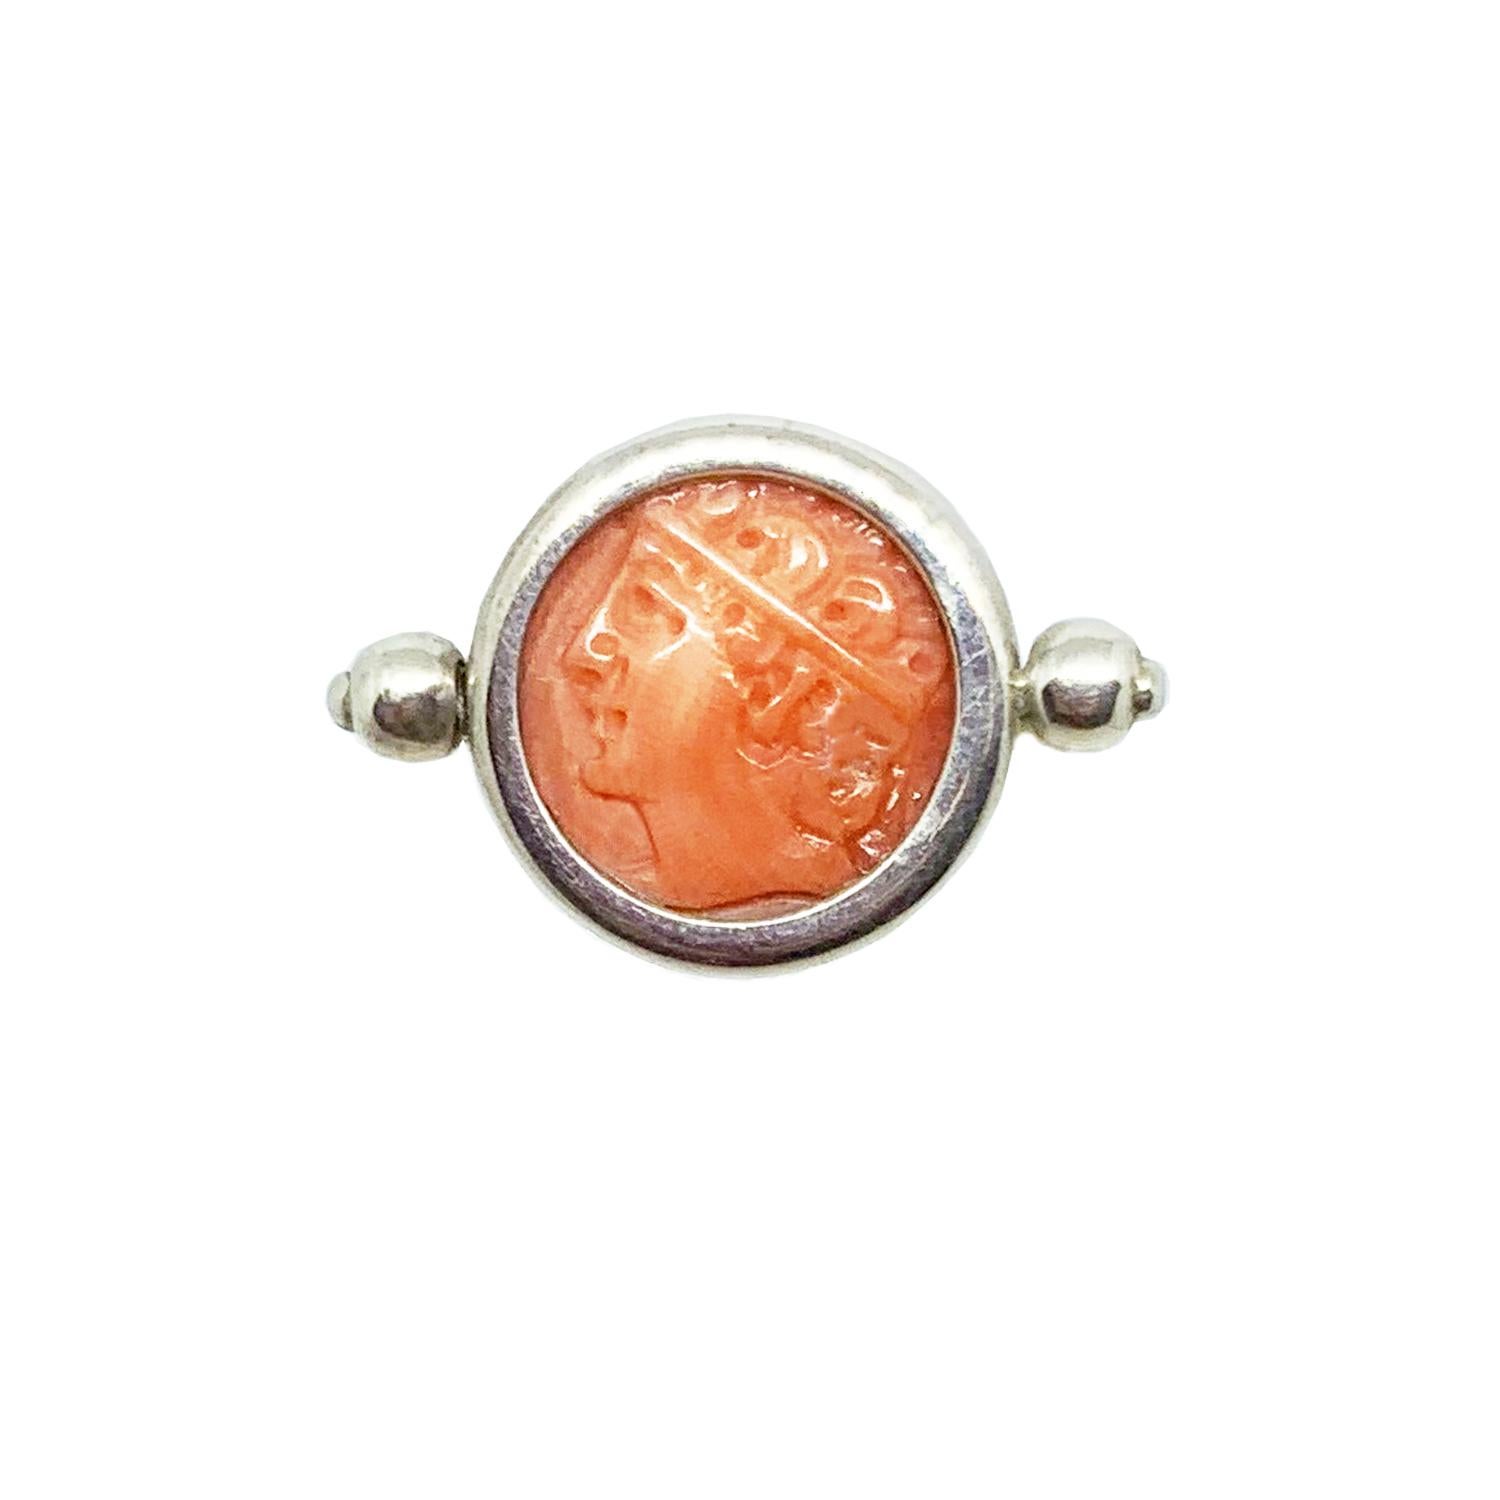 An authentic roman cameo (3-4th century AD ),  depicting the head of Demeter , is set in this sterling silver ring. Demeter , Ceres for Romans, was a maternal divinity of earth and fertility, tutelary deity of the crops, and goddess of birth.
Coral